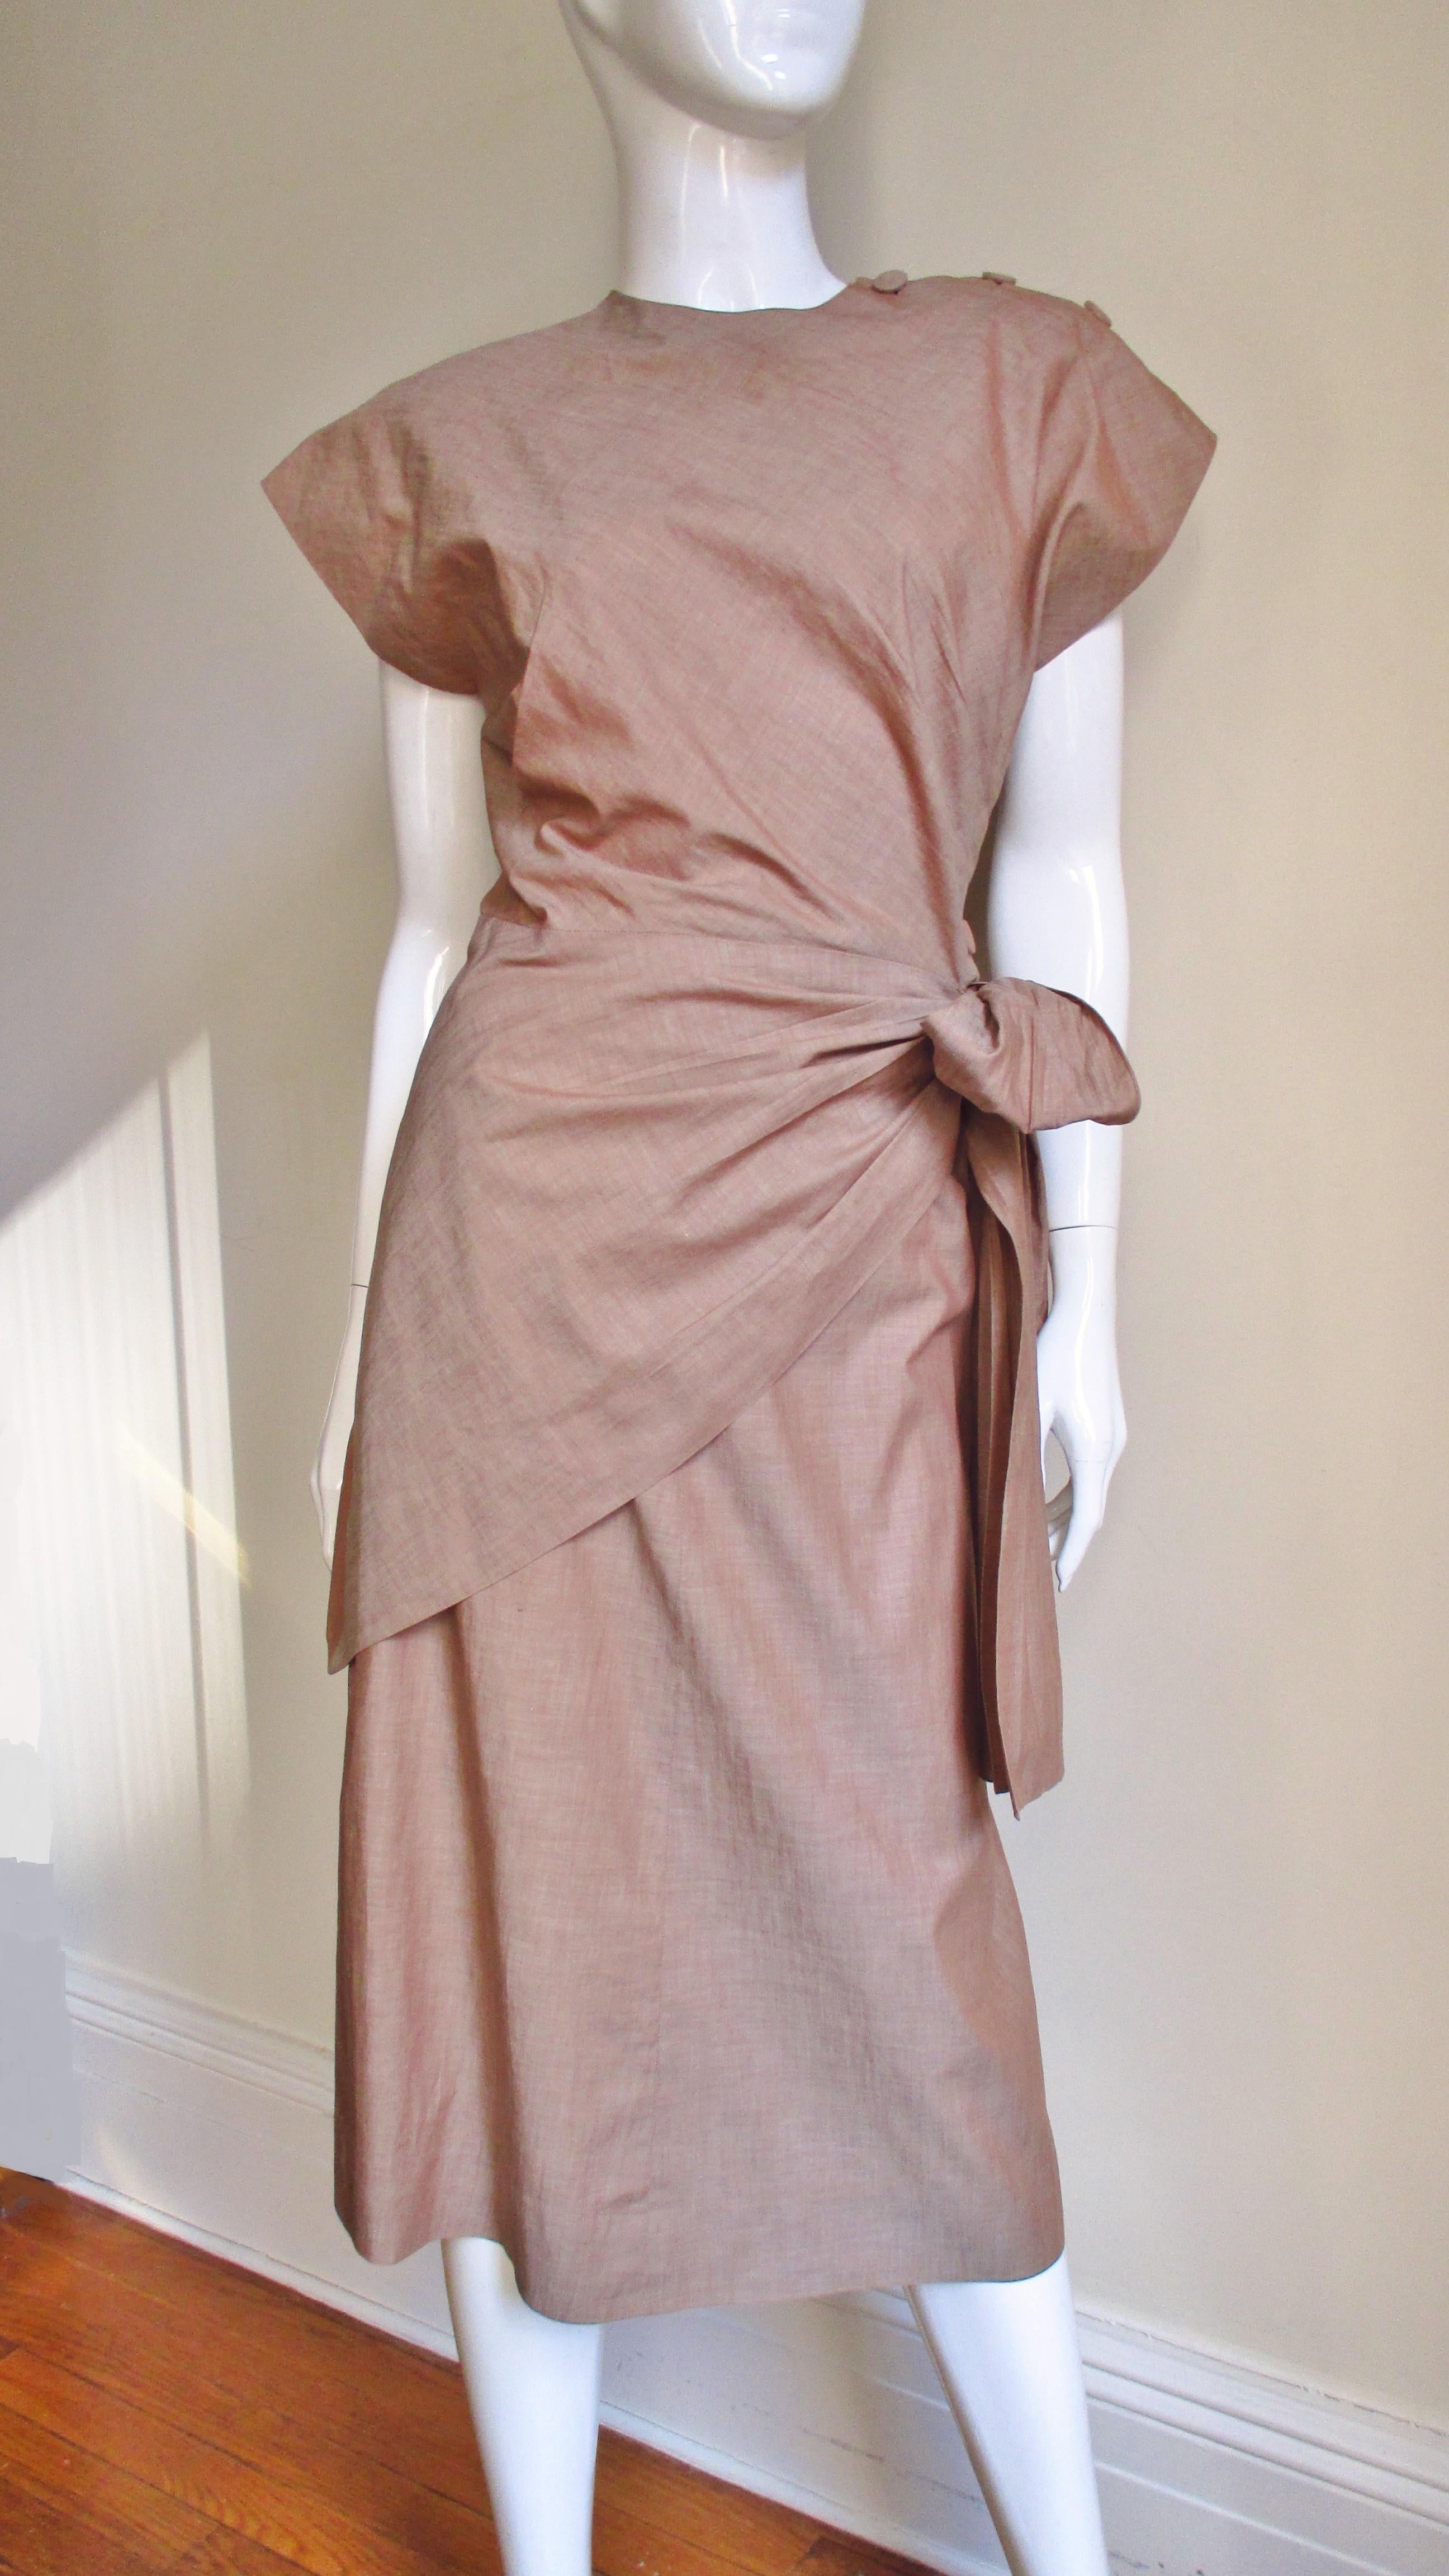 A fabulous 2 piece skirt and top set in a tan cotton linen blend.  The top has a crew neck, cap sleeves, shoulder pads and wraps closing at one side and shoulder with self covered buttons and bound buttonholes plus ties at that waist. The A line